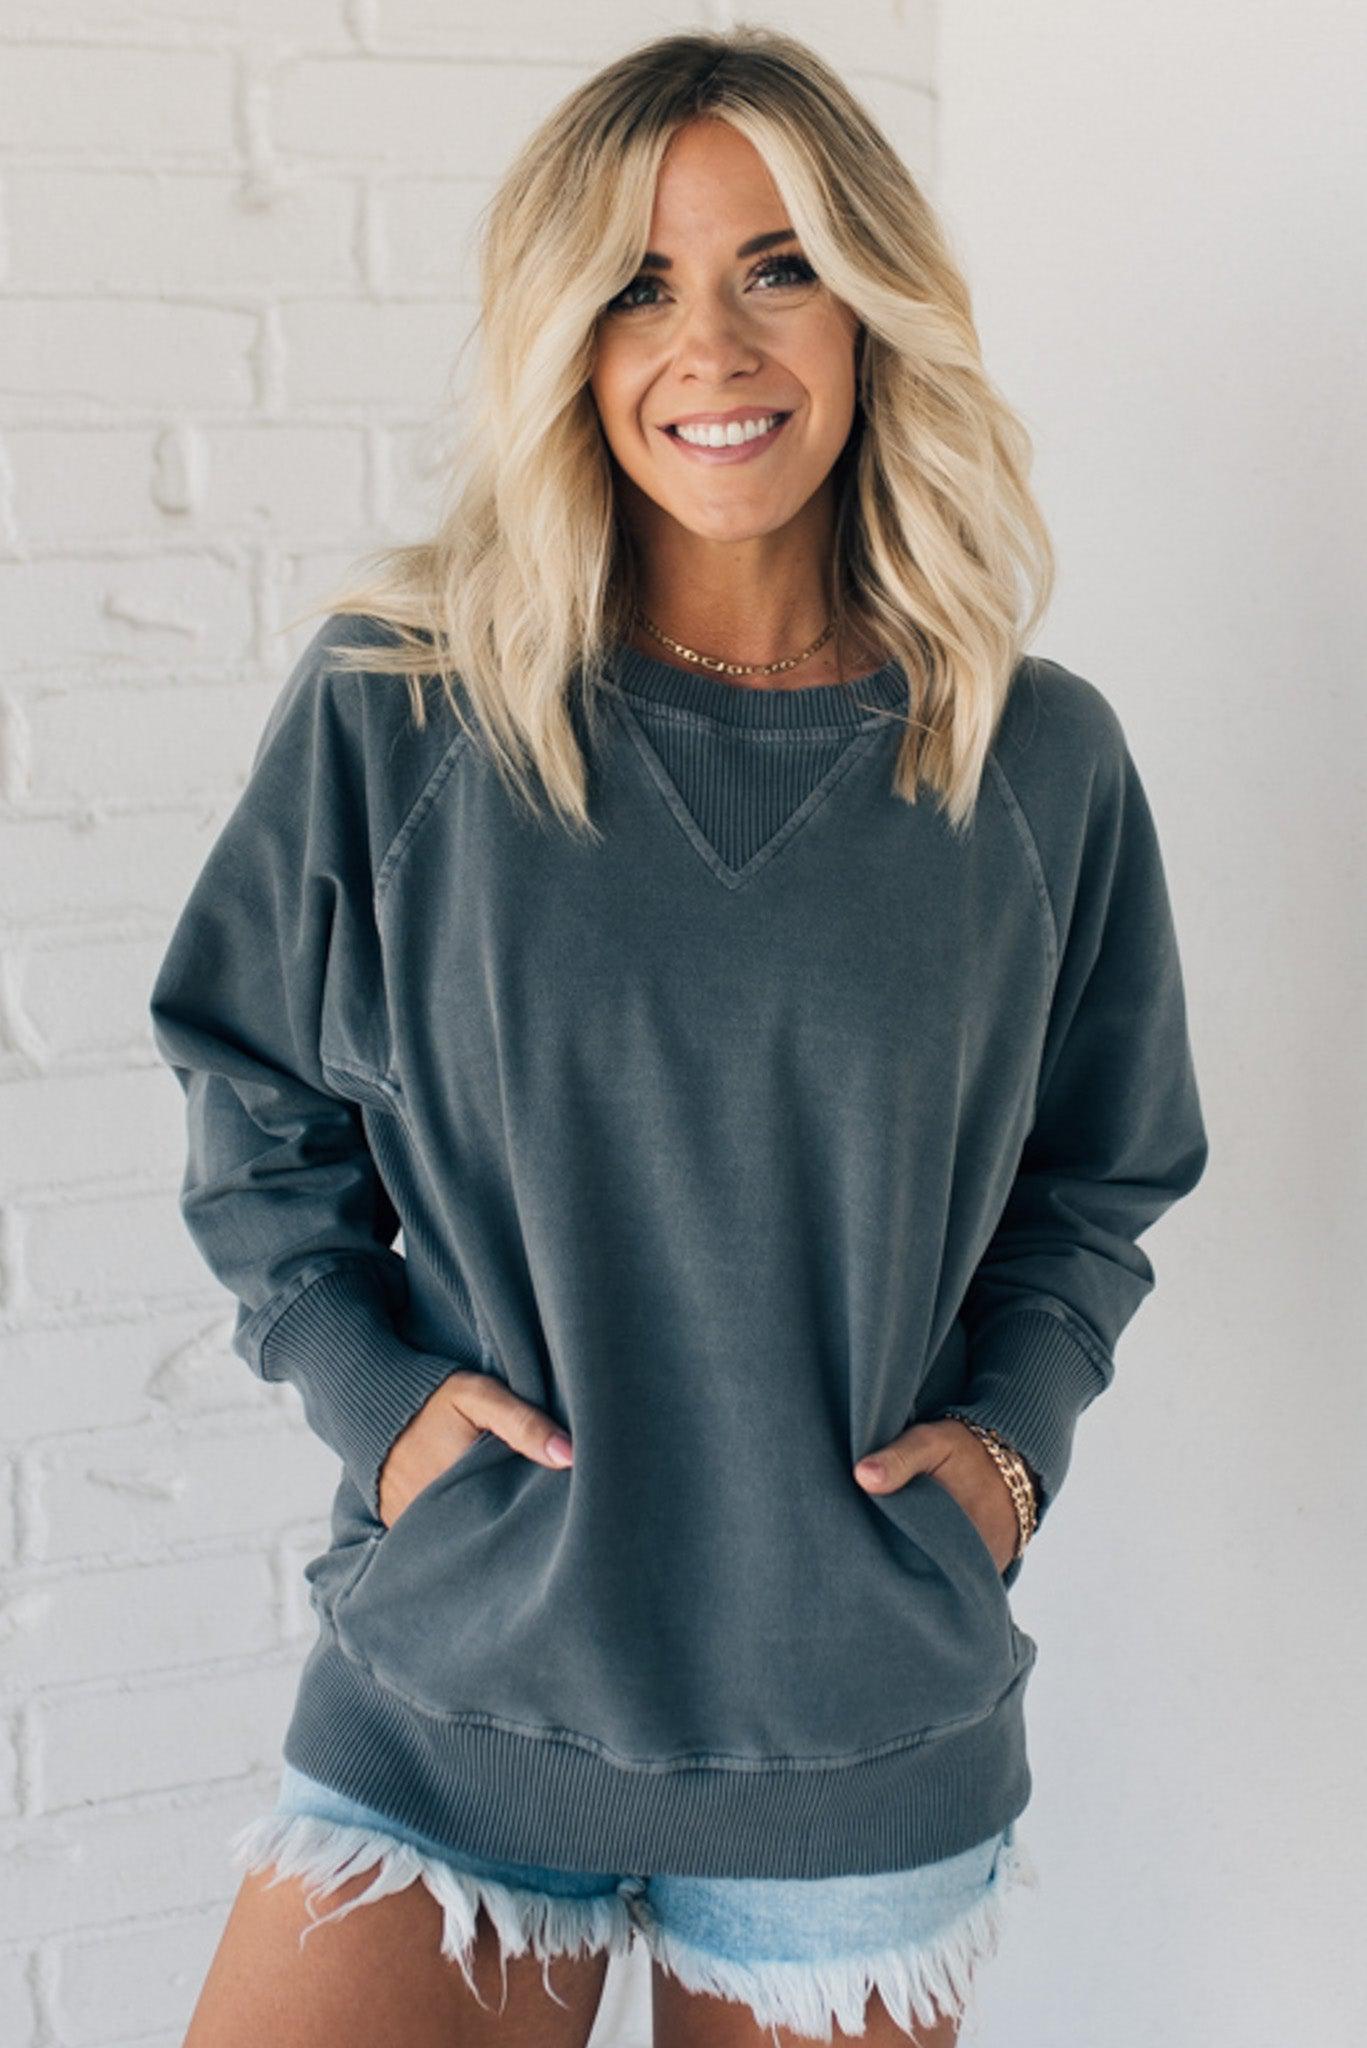 Woman wearing ribbed time sweatshirt with side pockets.